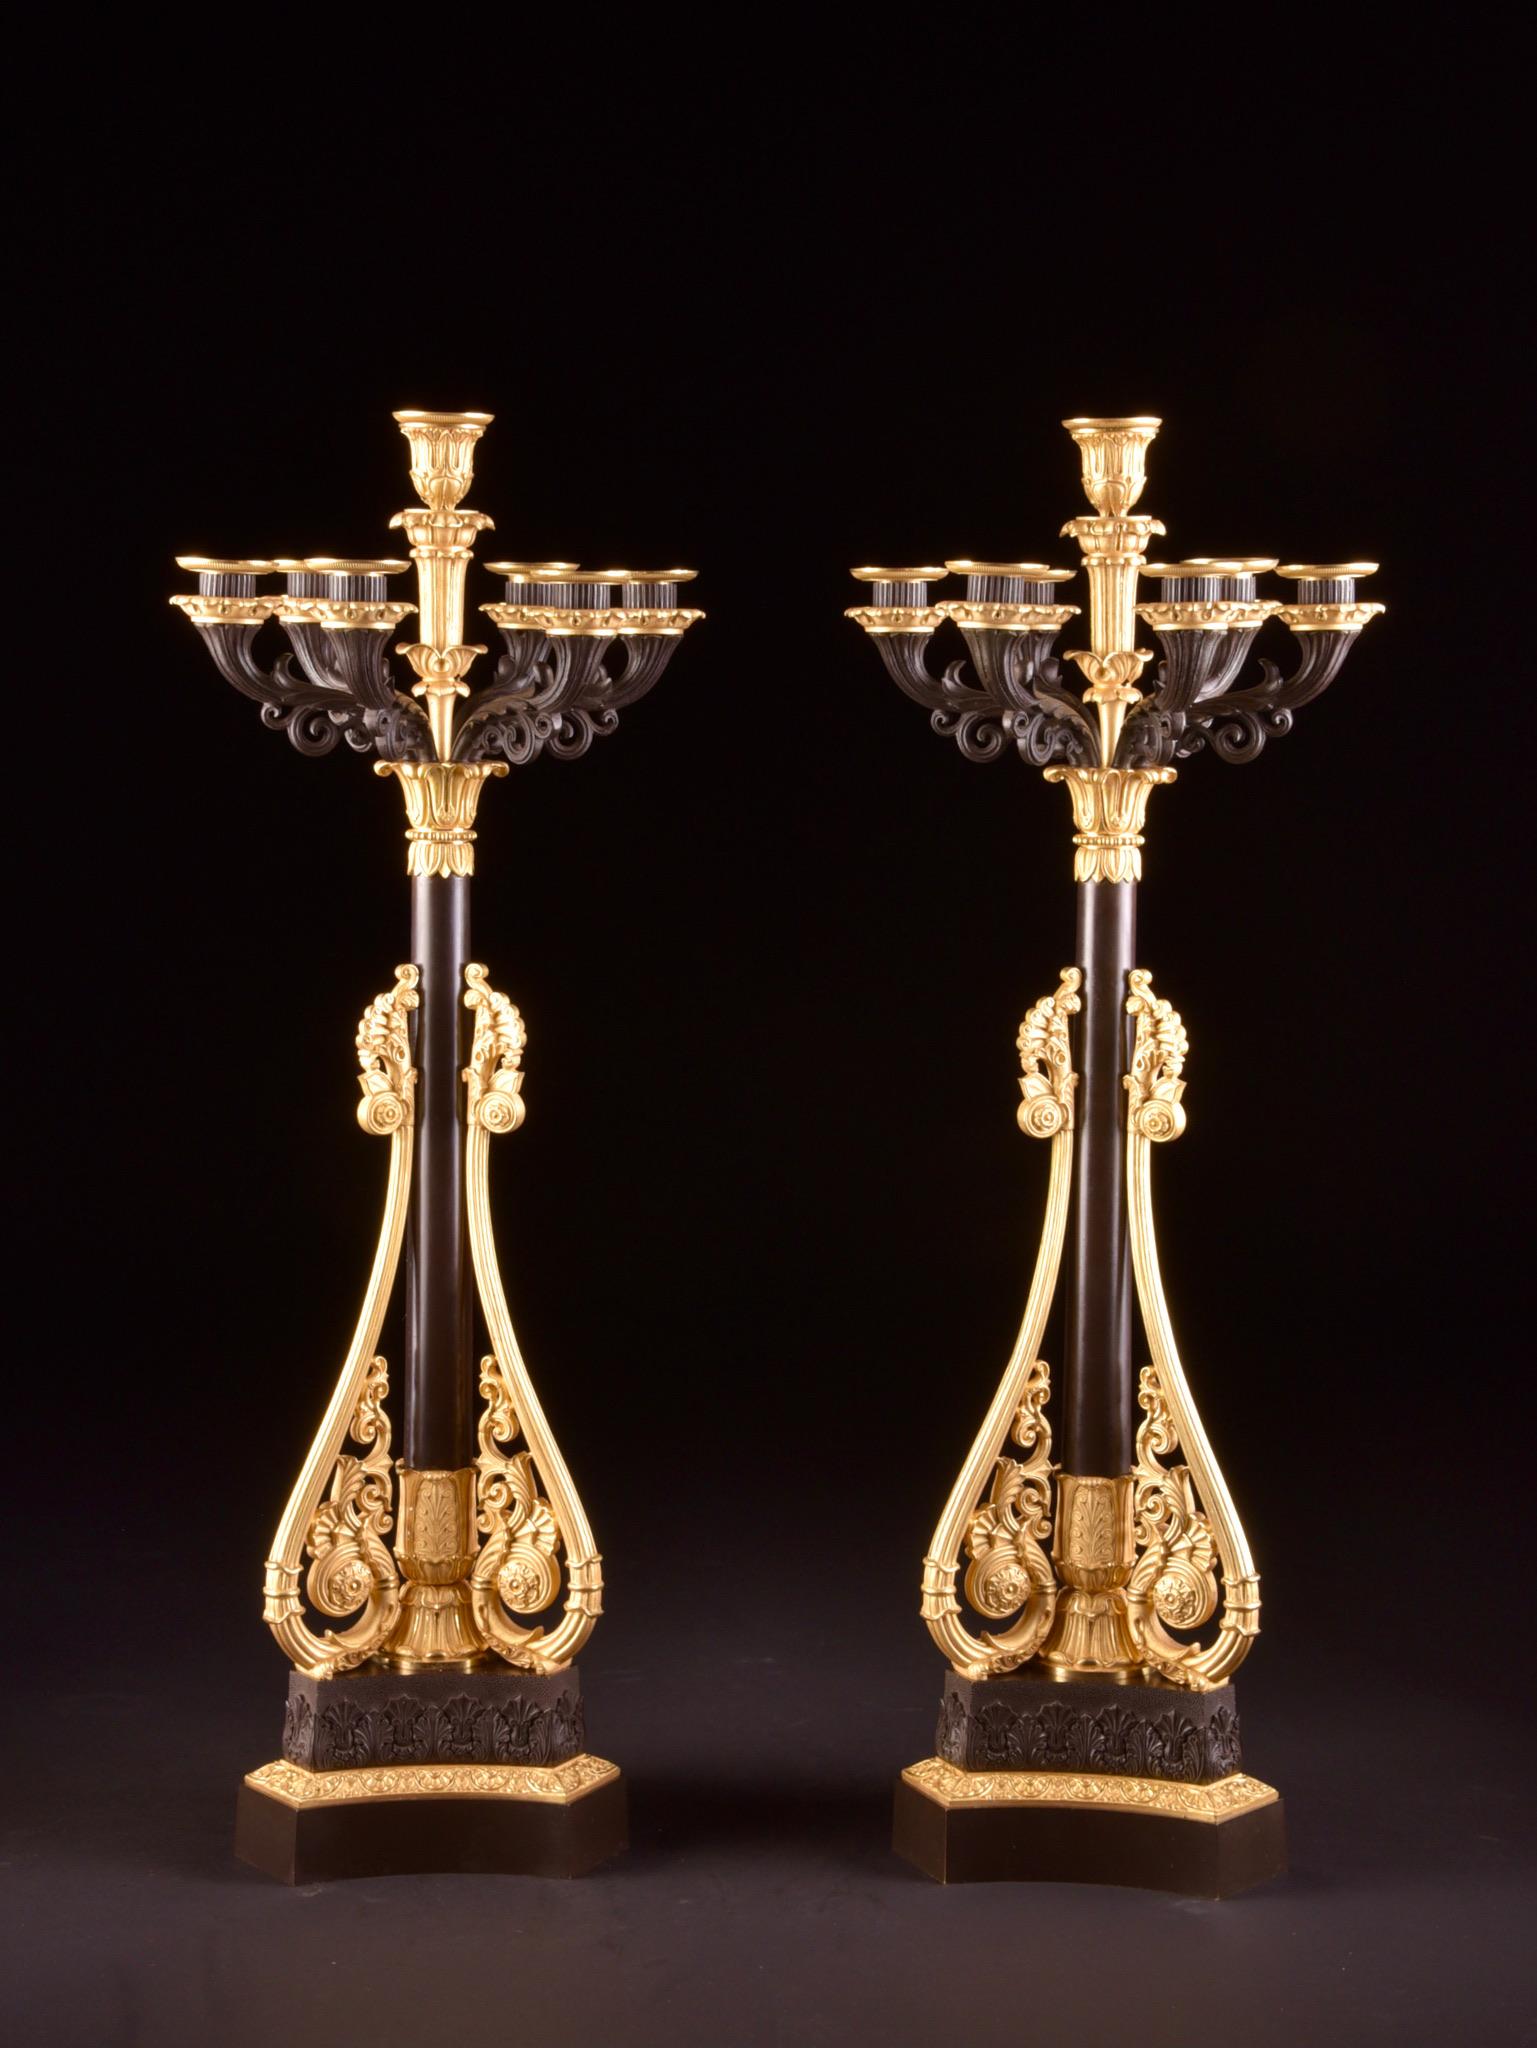 19th Century Attributed to Claude Galle Fabric, a Large Pair of Candelabra